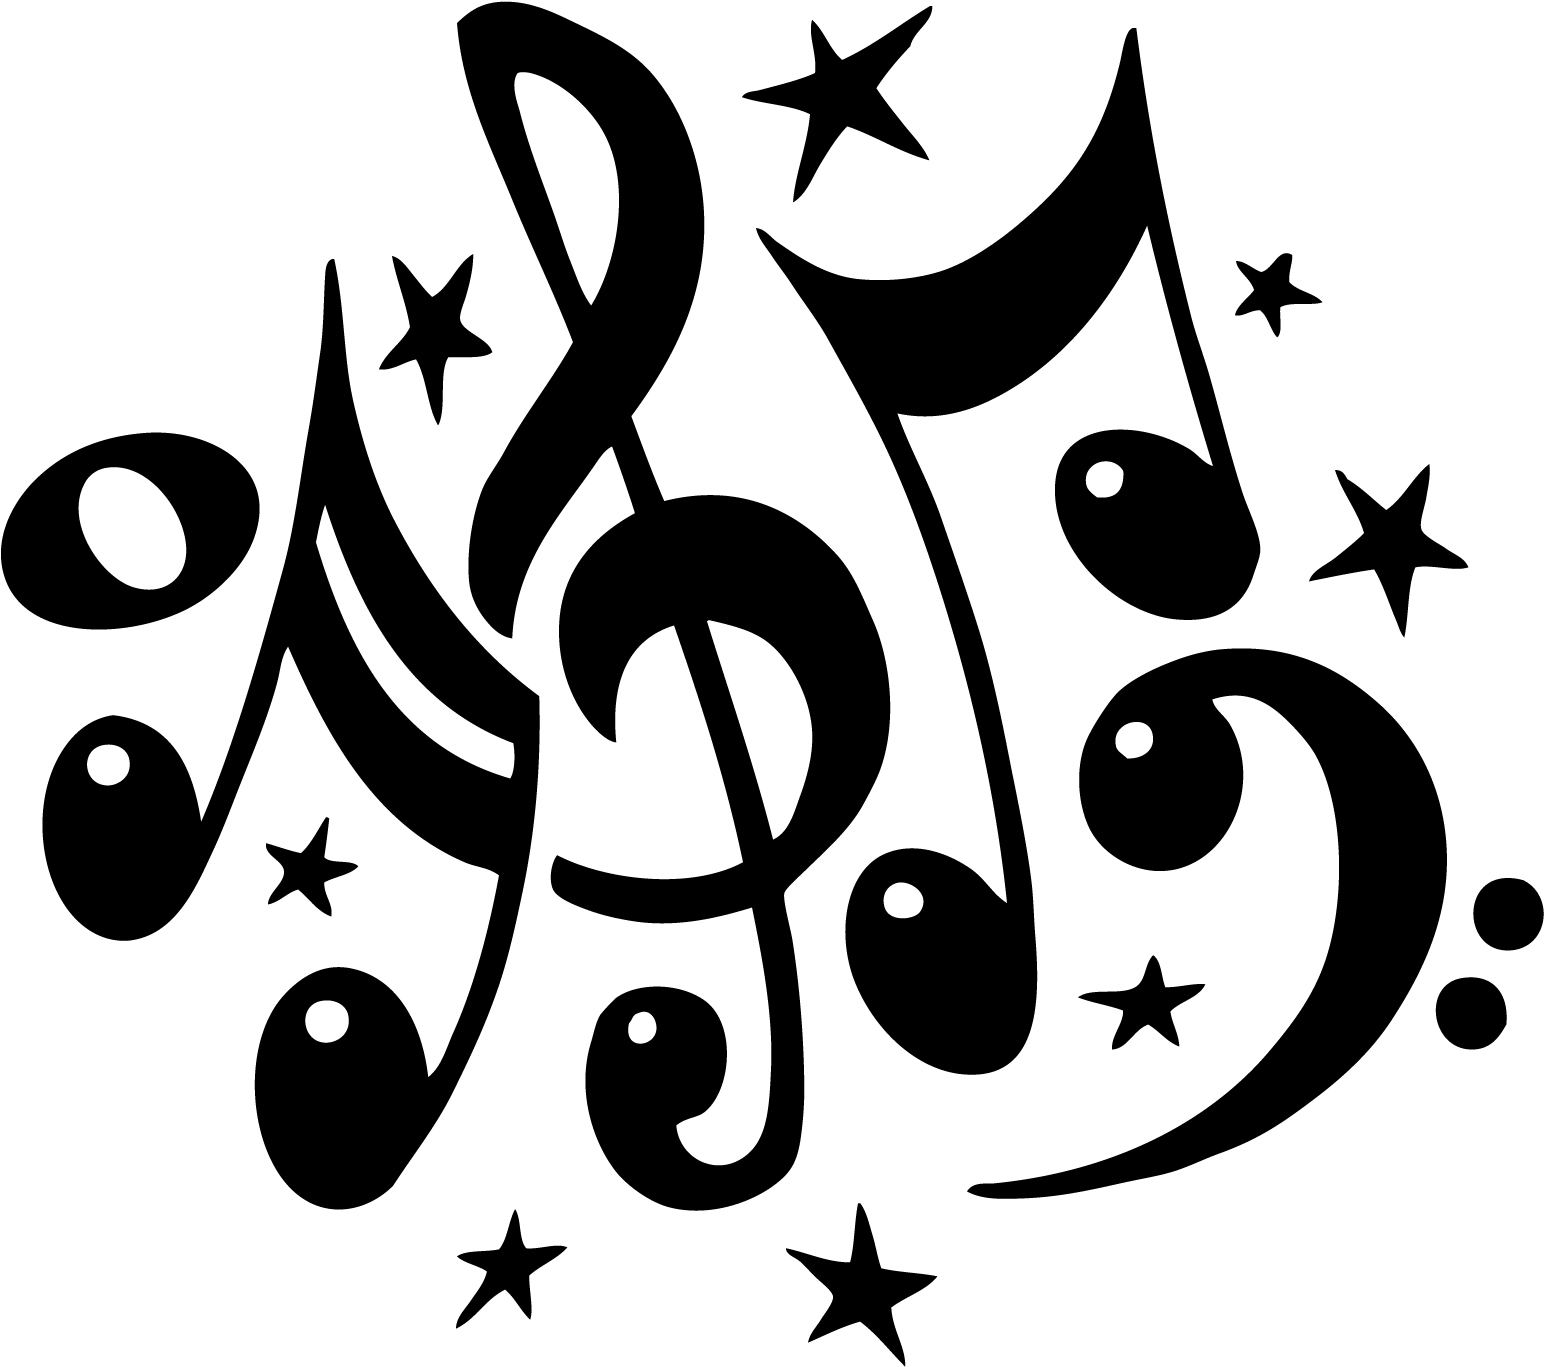 Music notes musical notes clip art free music note clipart image 1 3 - Clipartix